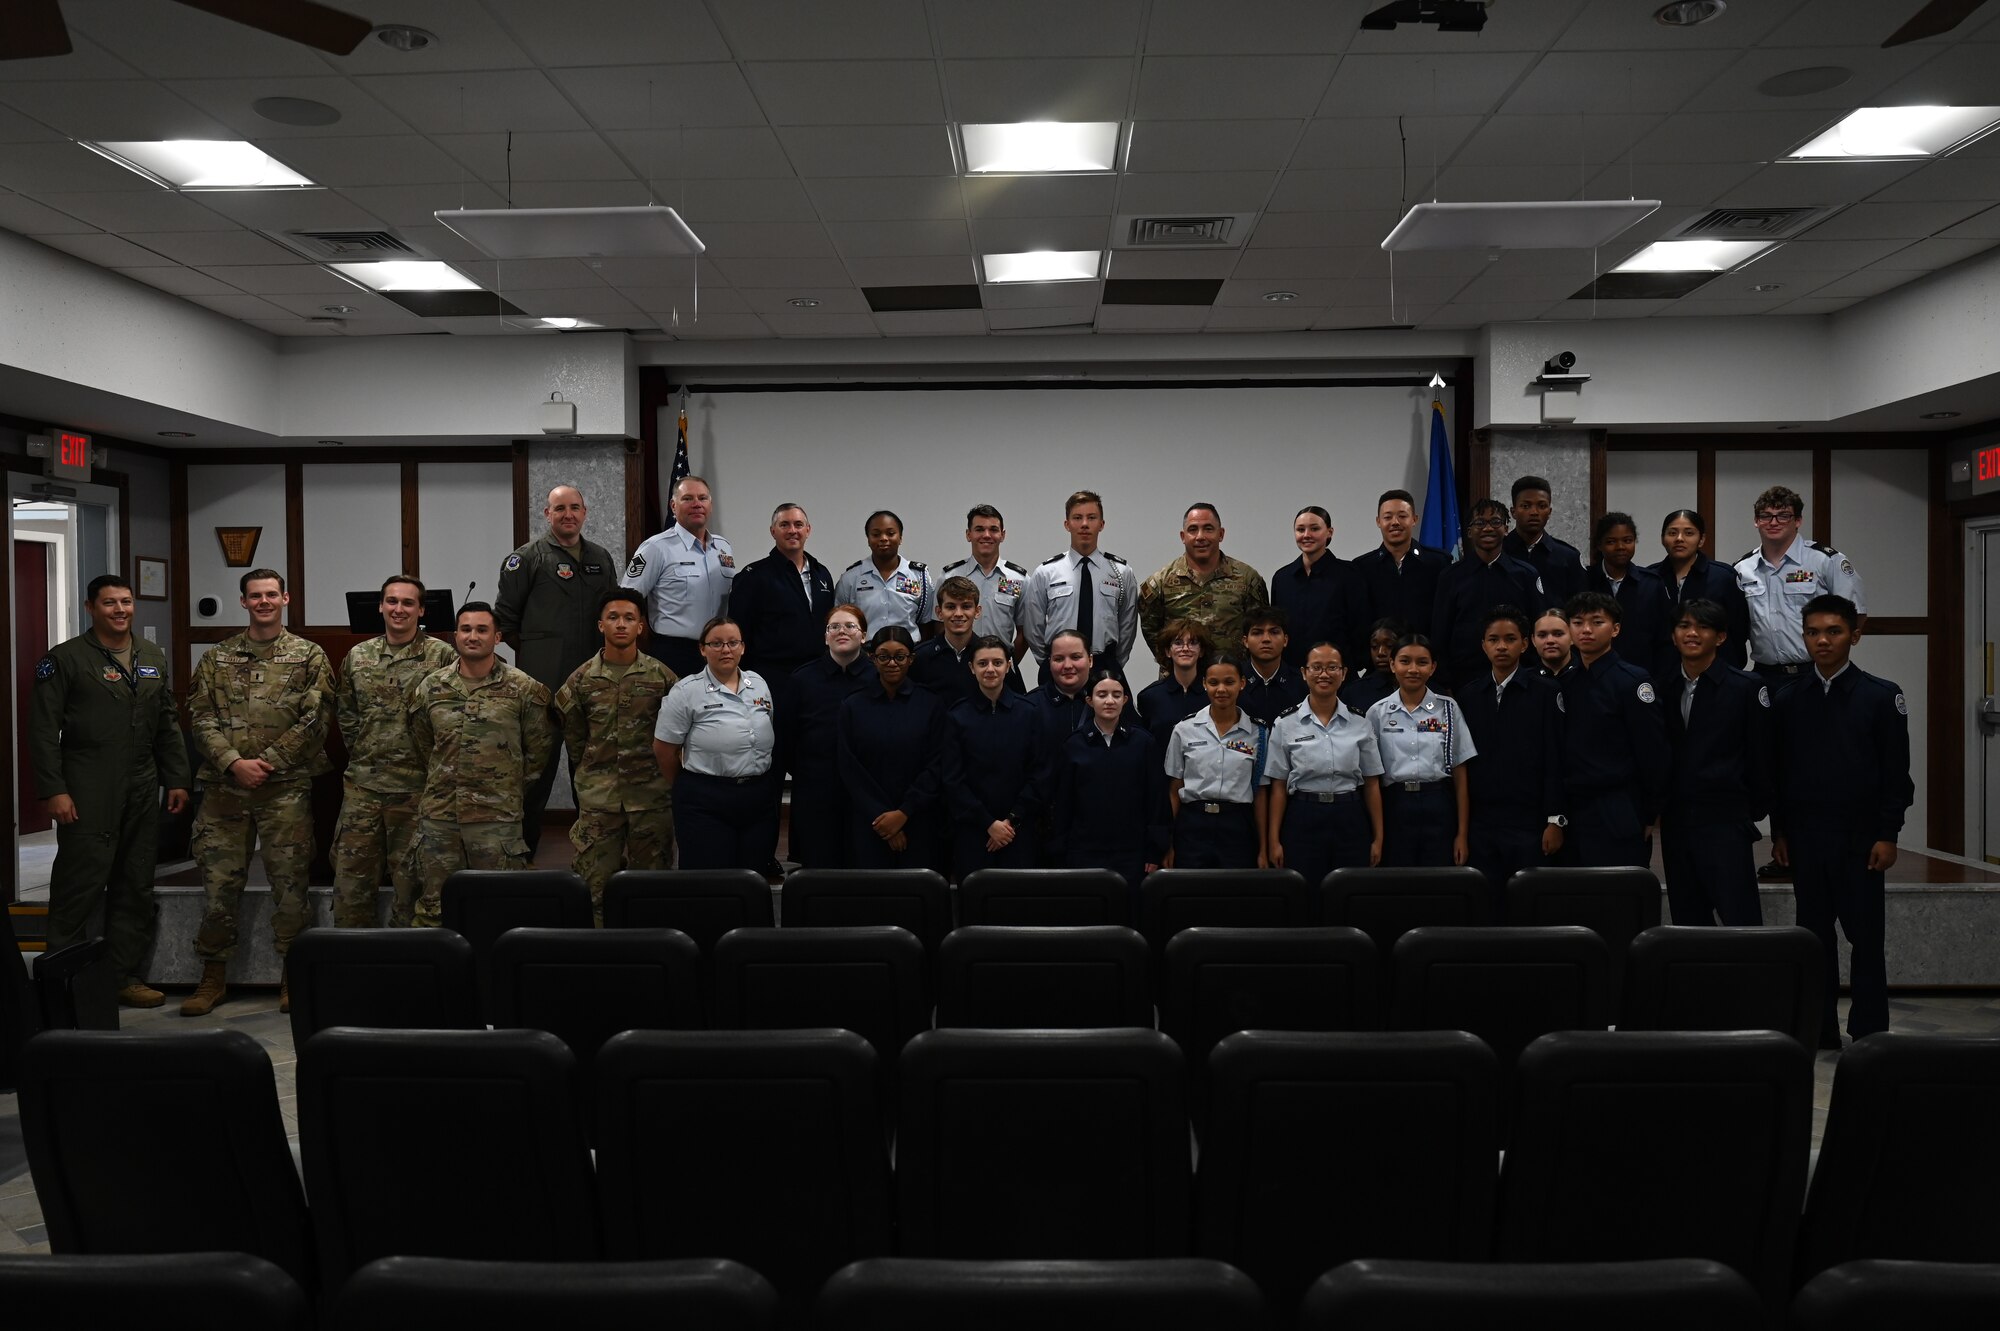 Members of the 350th Spectrum Warfare Wing and the Pensacola High School Air Force JROTC take a group photo at the conclusion of a wing tour at Eglin Air Force, Fla., Nov. 1, 2023. During the briefings, the cadets had the opportunity to talk with the wing commander and other wing members about their career fields and Air Force experiences. (U.S. Air Force photo by Capt. Benjamin Aronson)